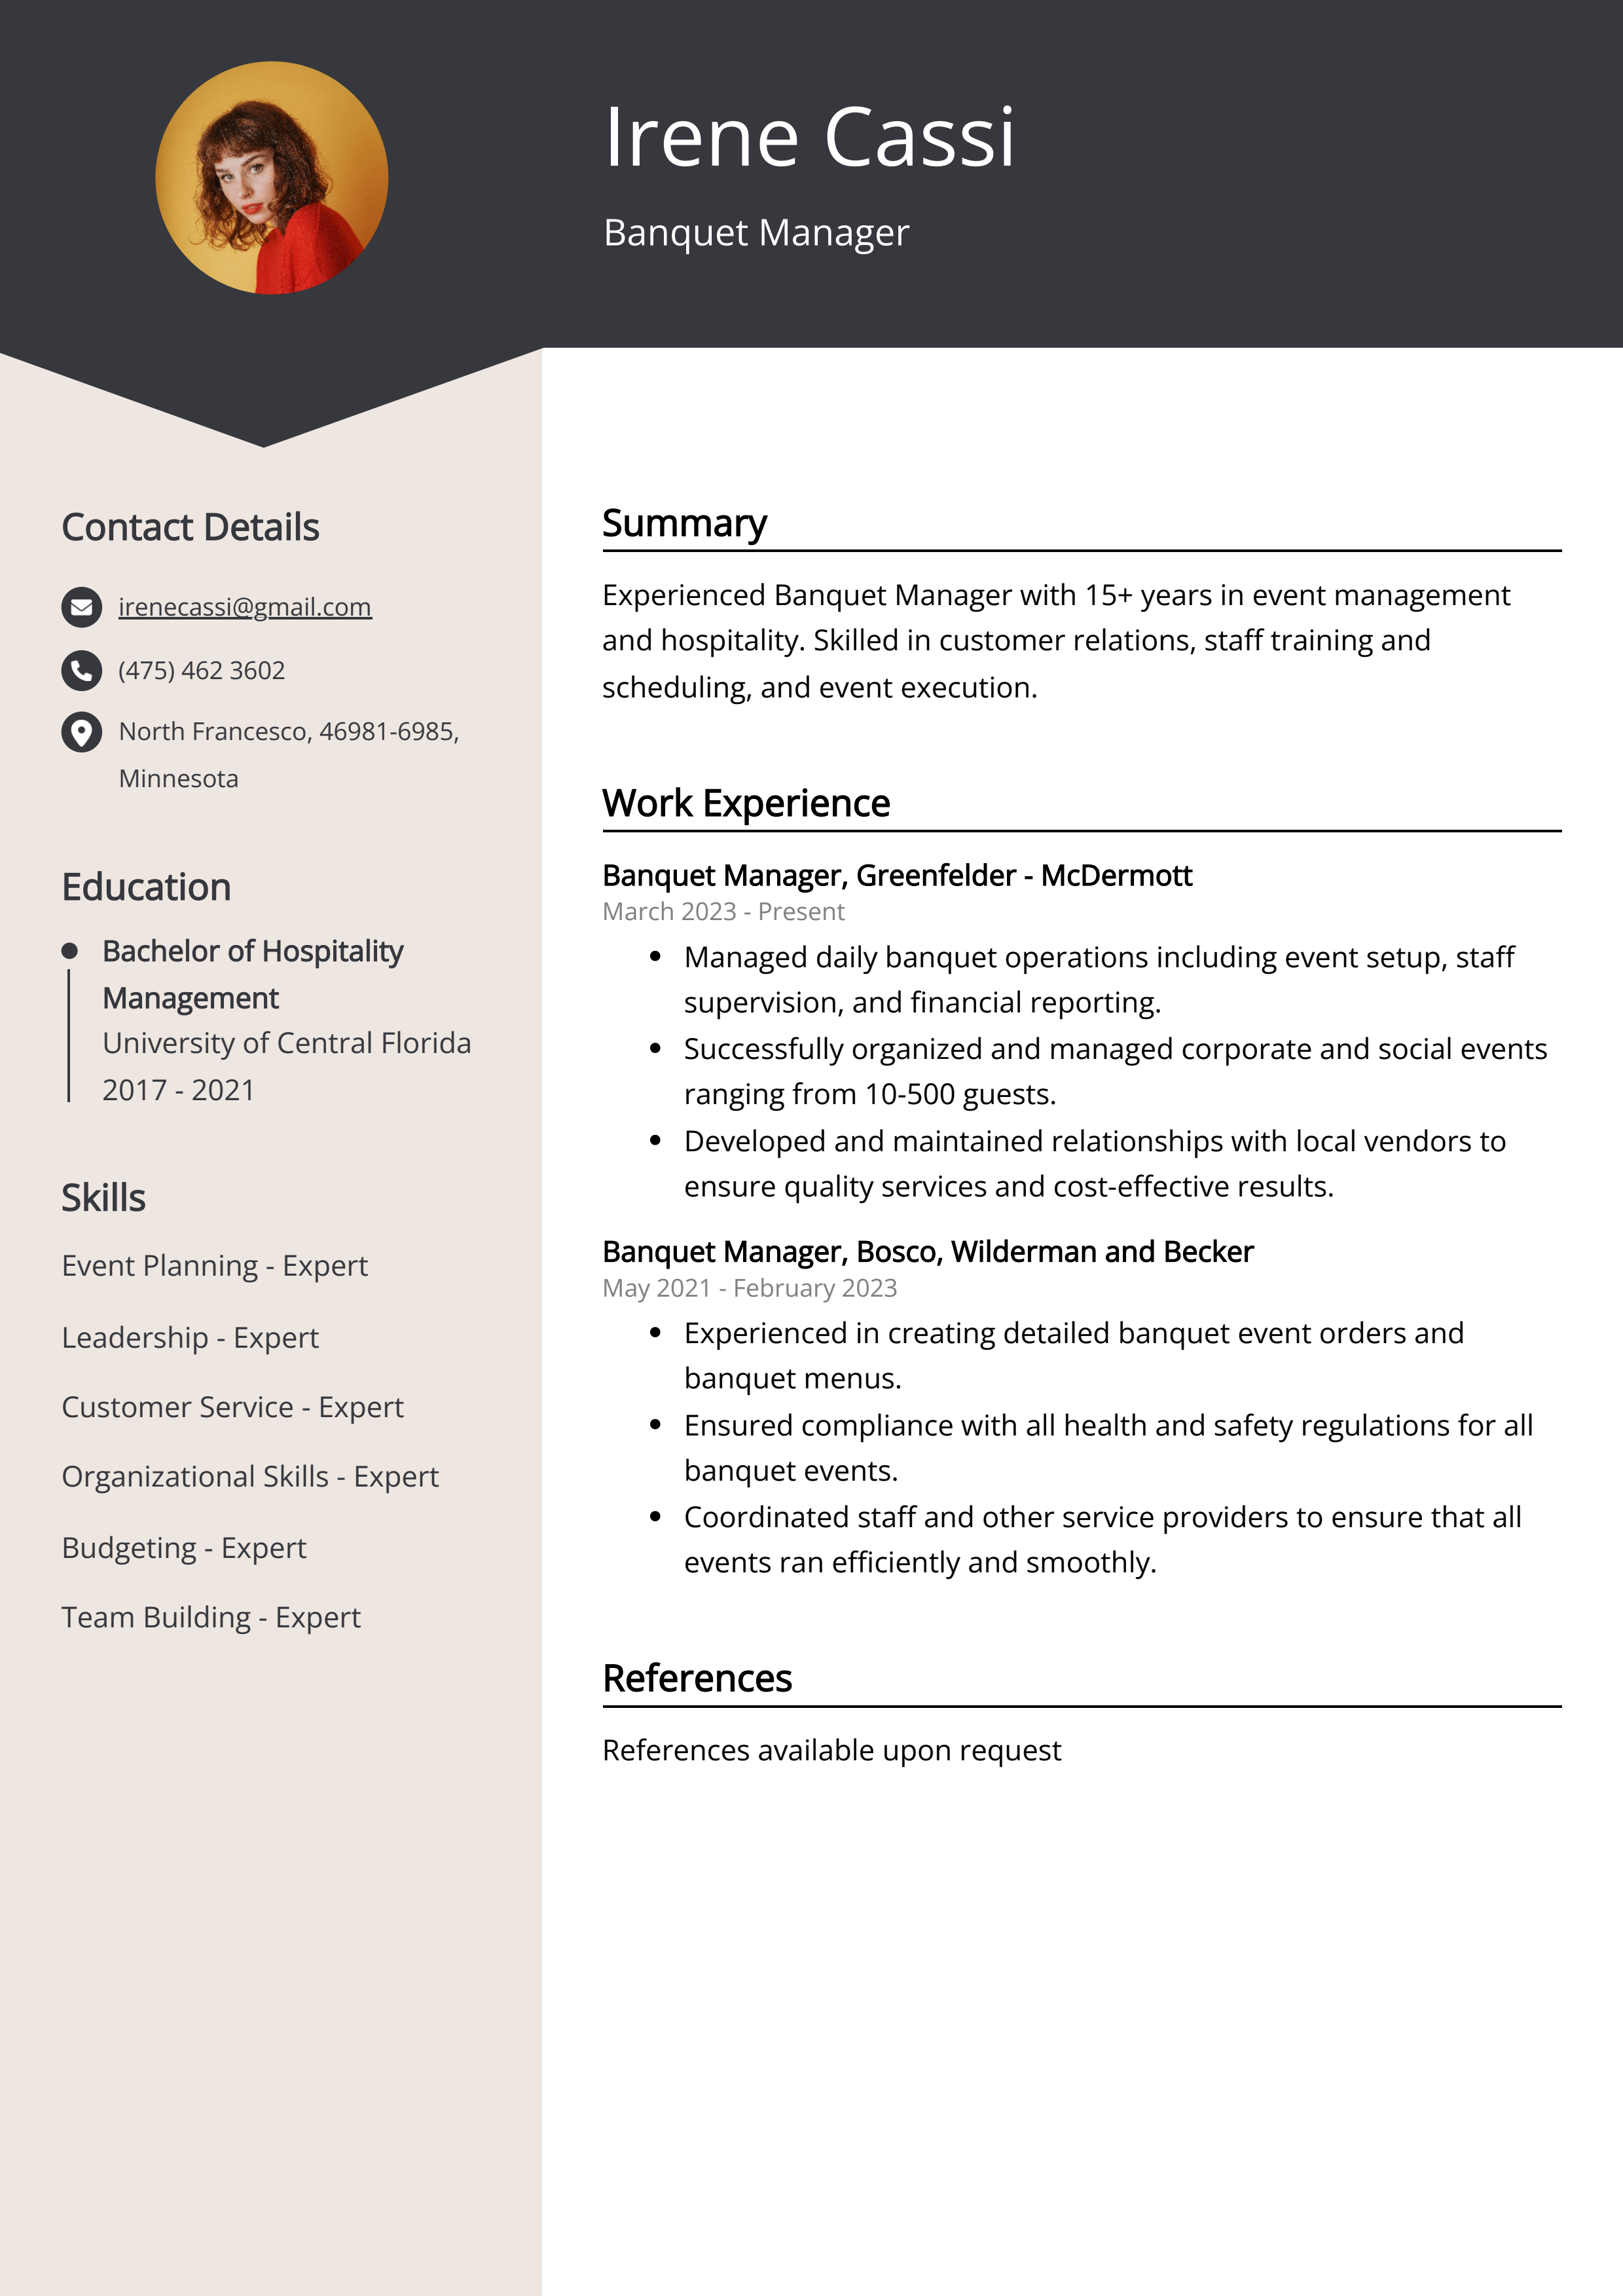 Banquet Manager CV Example